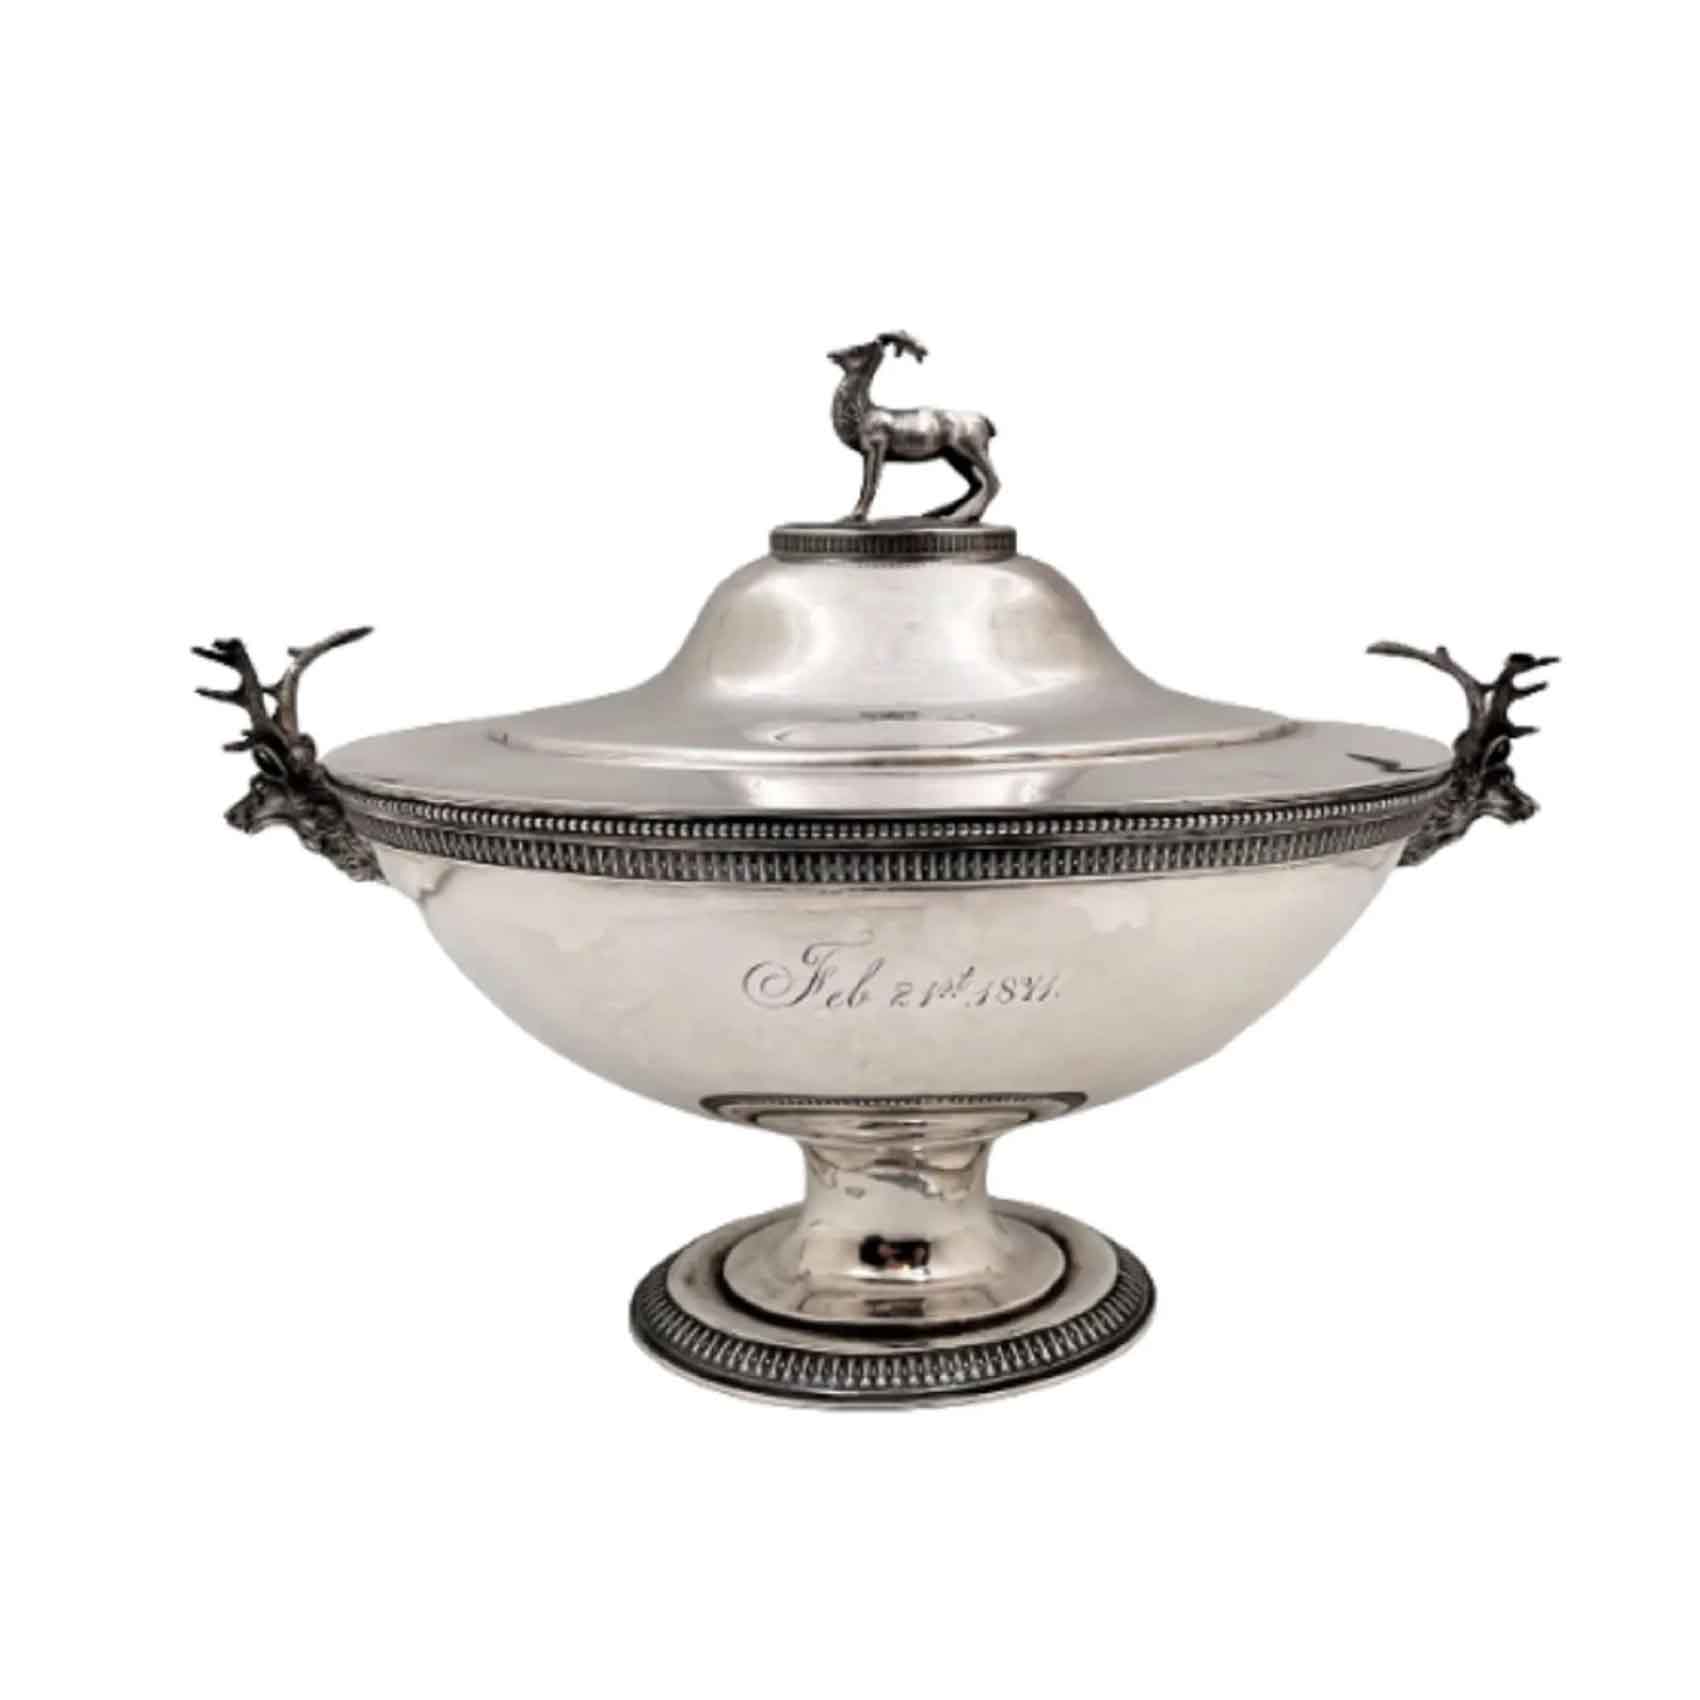 New England and midwestern 19th-century silver holloware arrives at SJ Auctioneers May 26